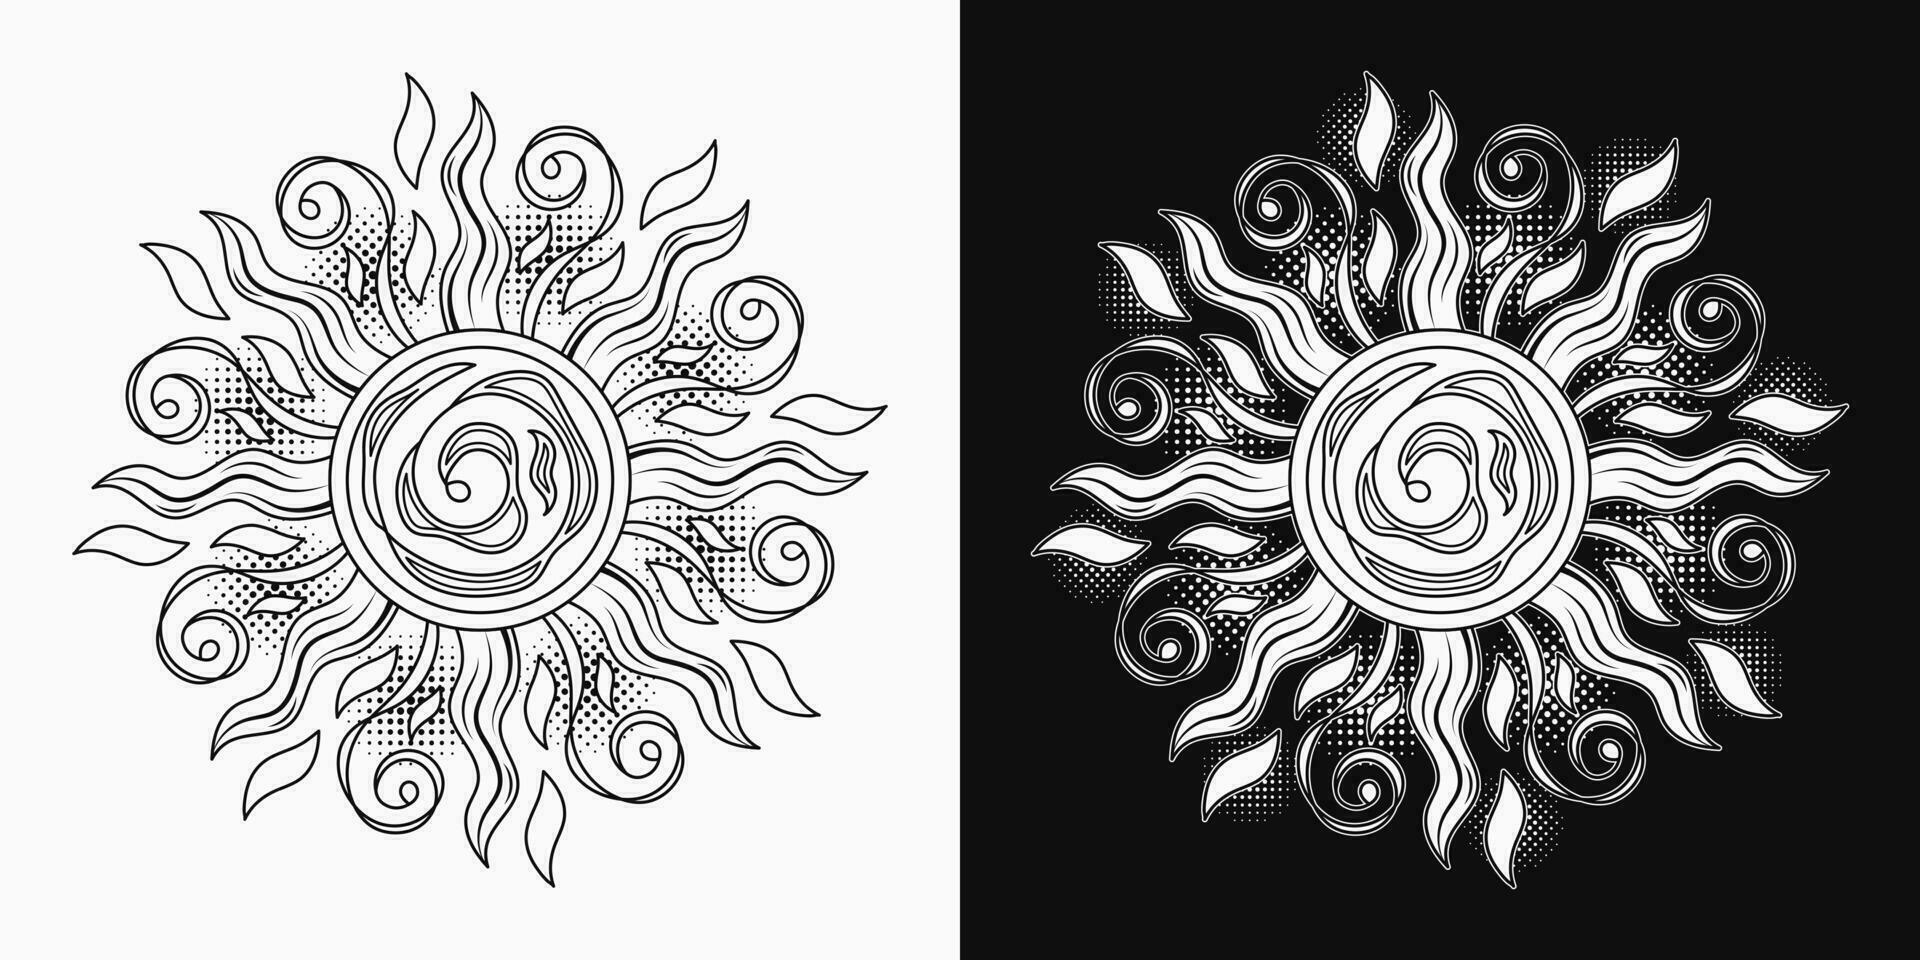 Sun with spirals, swirls, halftone shapes. Concept of harmony and balance. Monochrome illustration in vintage style on black, white background. Solar traditional sign. Good for groovy, hippie style vector